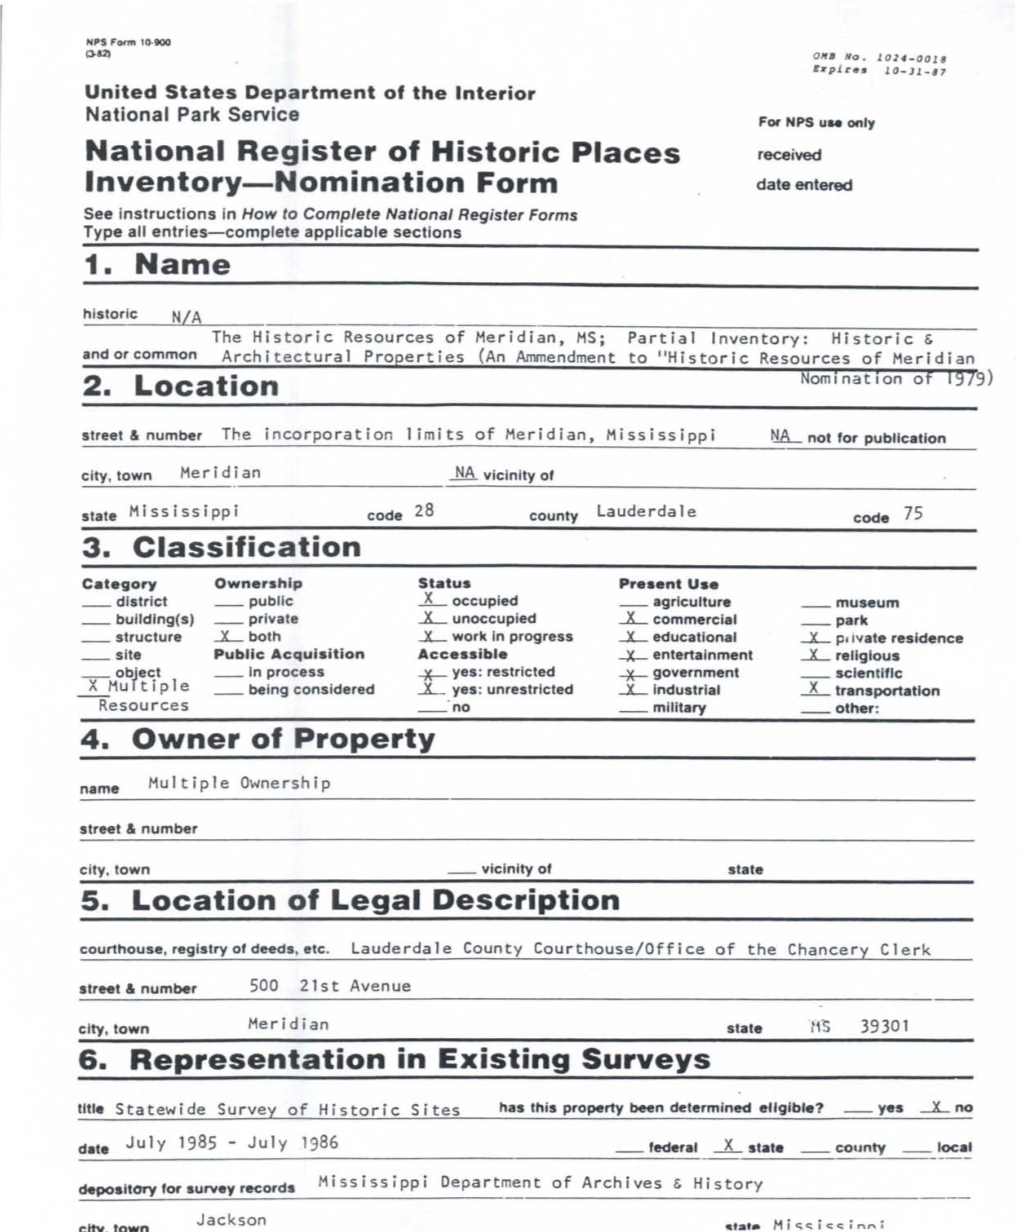 National Register of Historic Places Inventory-Nomination Form 1. Name 2. Location 3. Classification 4. Owner of Property 5